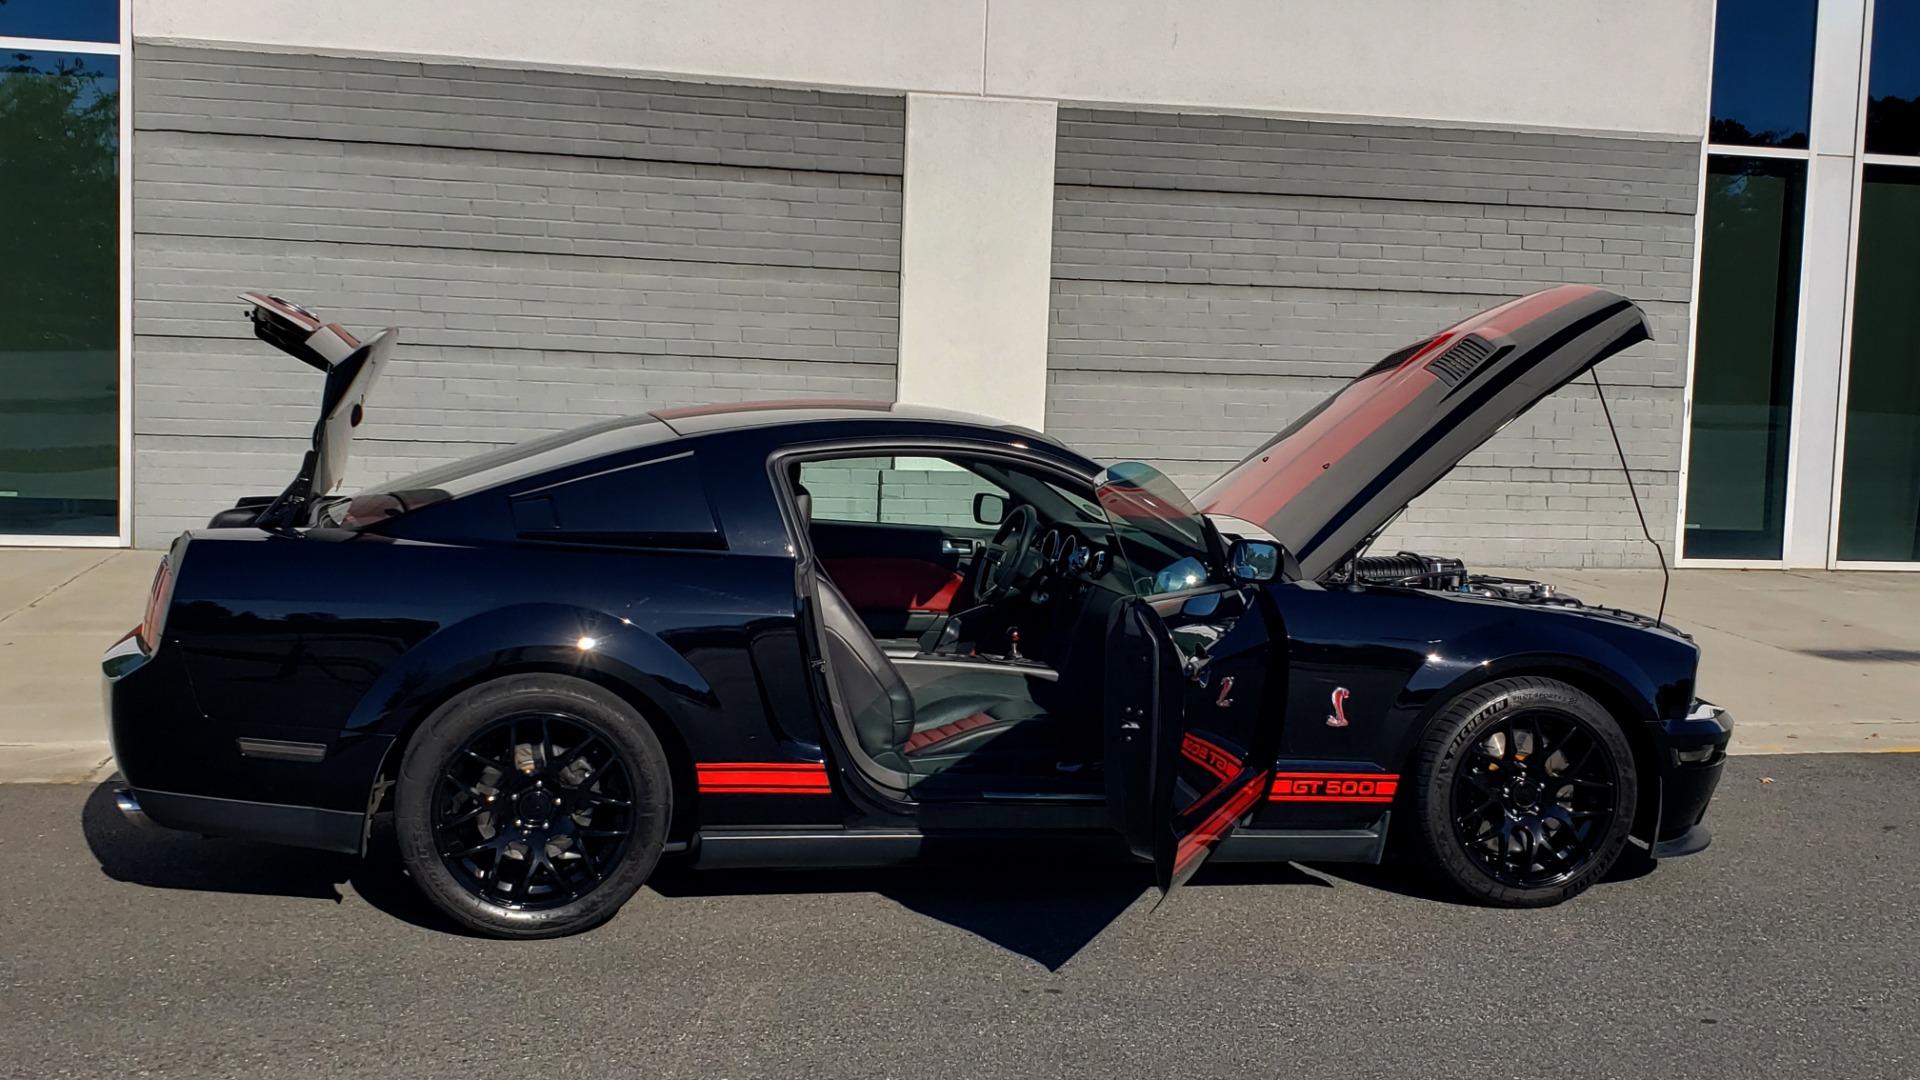 Used 2009 Ford MUSTANG SHELBY GT500 / RED SNAKE EDITION / UPGRADED 750RWHP / NAV / SHAKER SND for sale Sold at Formula Imports in Charlotte NC 28227 17